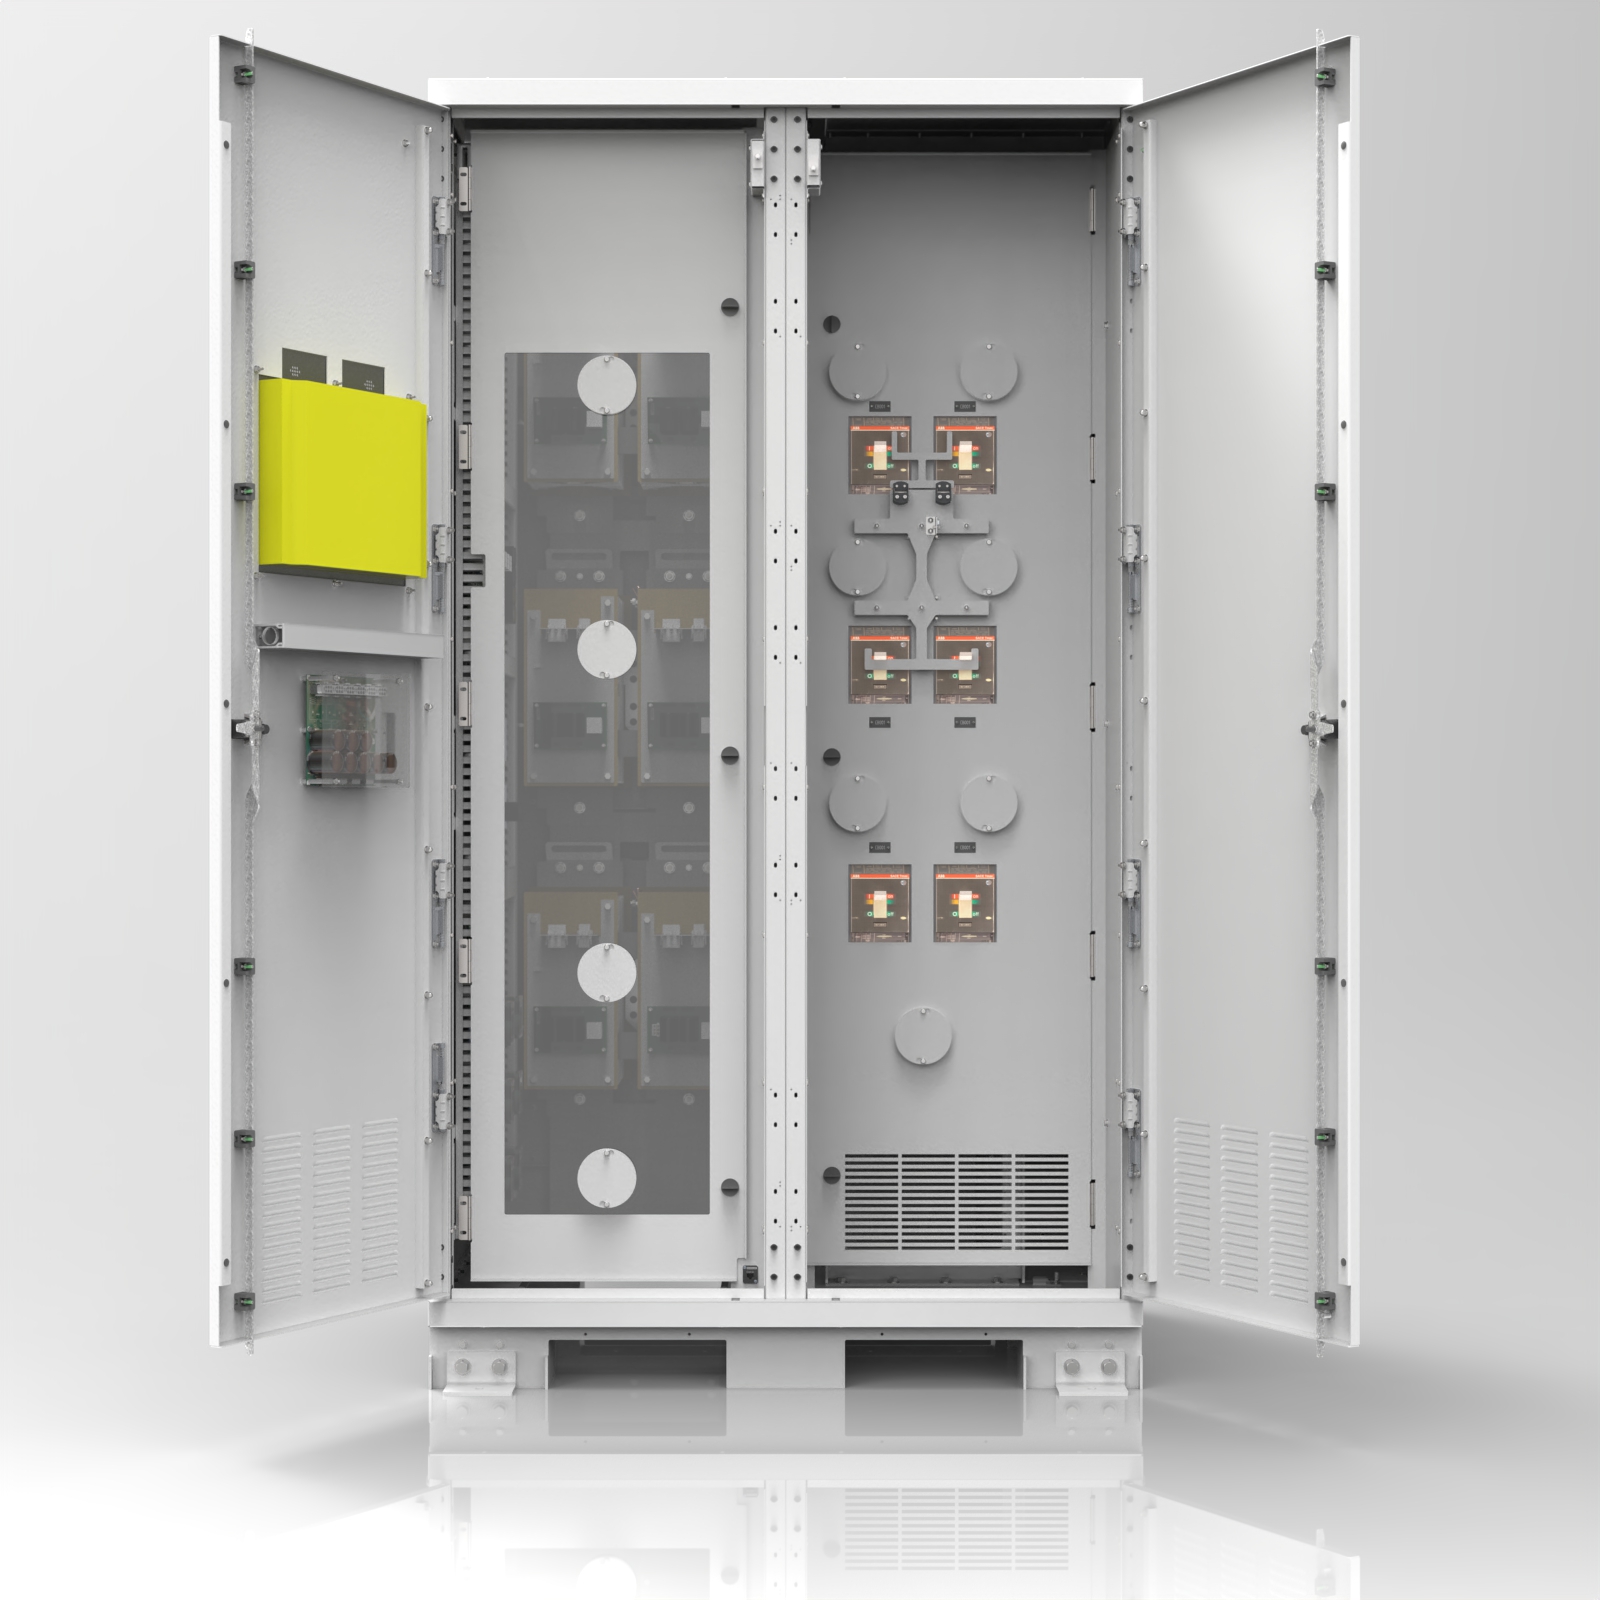 600 A eSTS Static Transfer Switch Outer Doors Open 